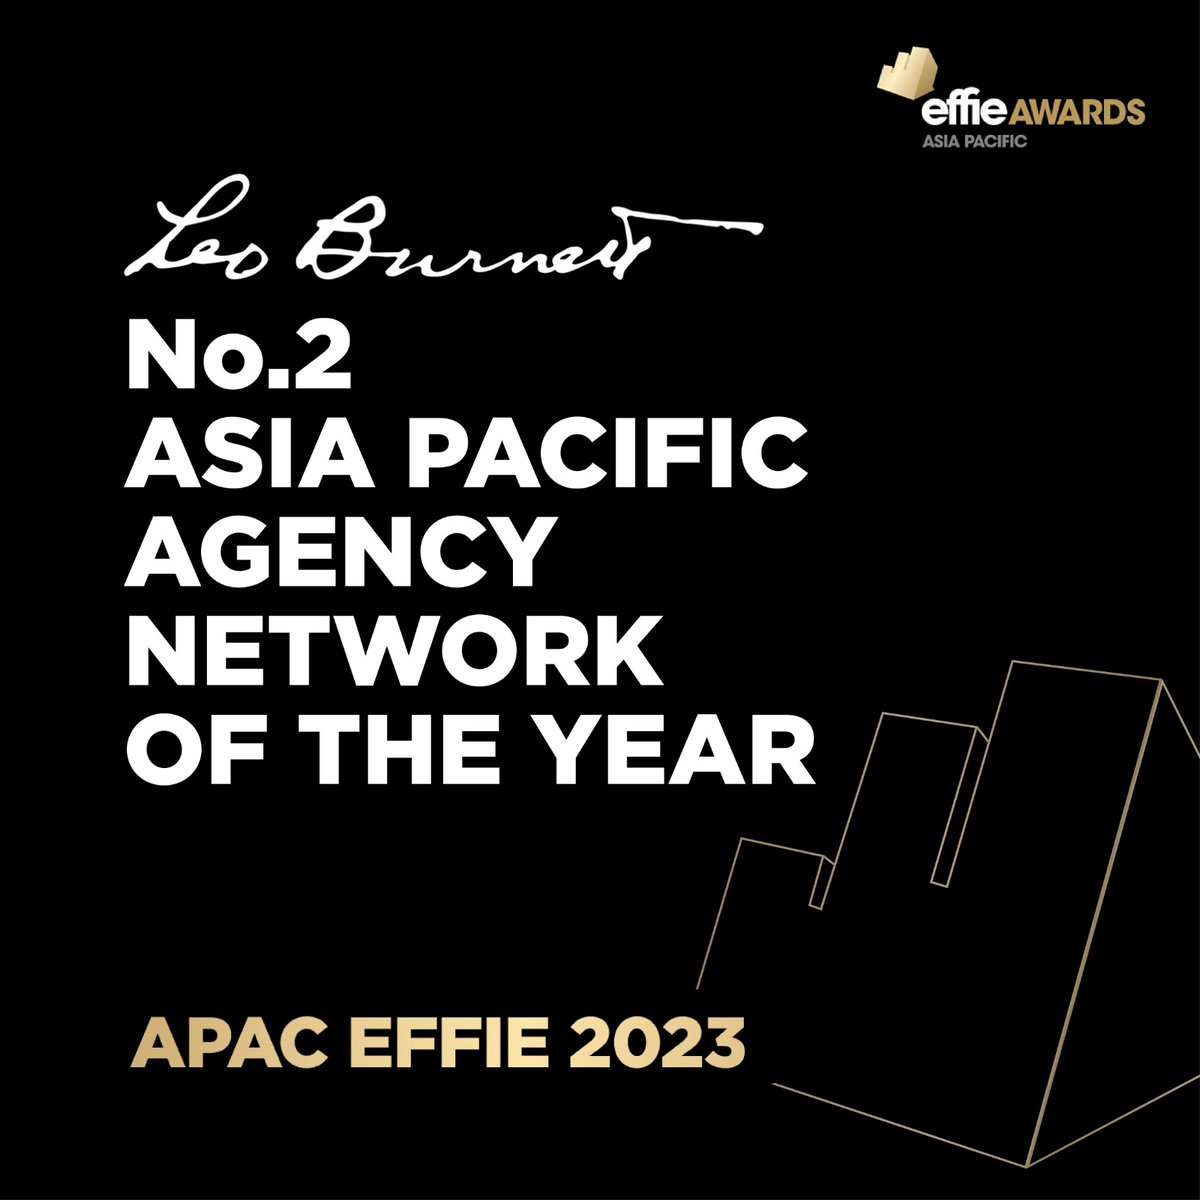 What a spectacular night @APACEffieAwards winning Agency of the year 2nd place, 5 Golds, Brand of the year 1st (P&G Whisper) & 2nd (Mondelez Oreo). Marketer of the year 1st (Mondelez) & 2nd (P&G) and Network of the Year 2nd place. Congratulations to team Burnett on this epic win.